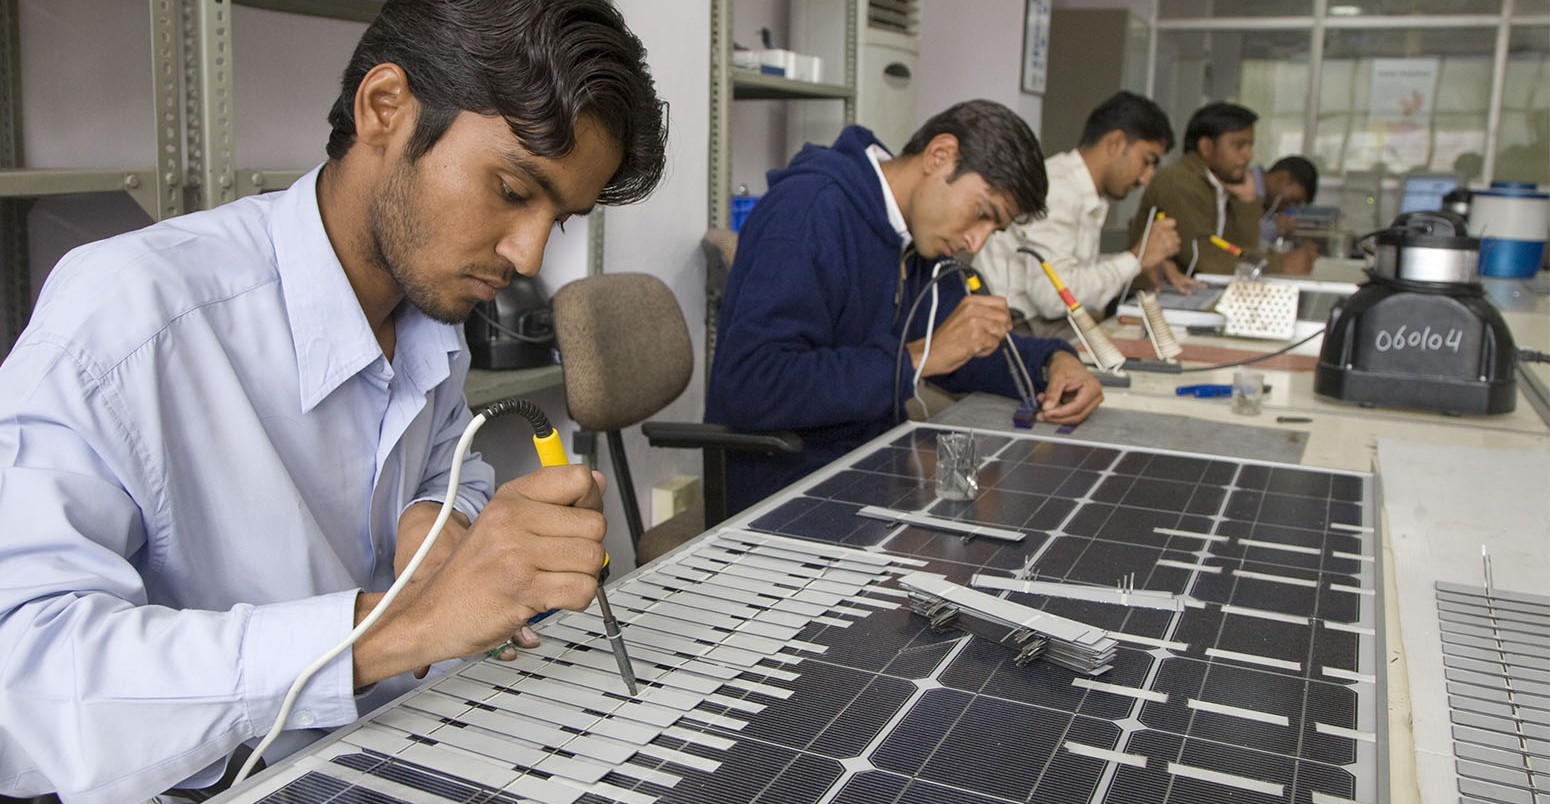 Solar panels being assembled in a factory near Jaipur, Rajasthan. The panels are for export to other countries and also for domestic use in India where solar power is helping to bring electricity to remote villages for the first time.